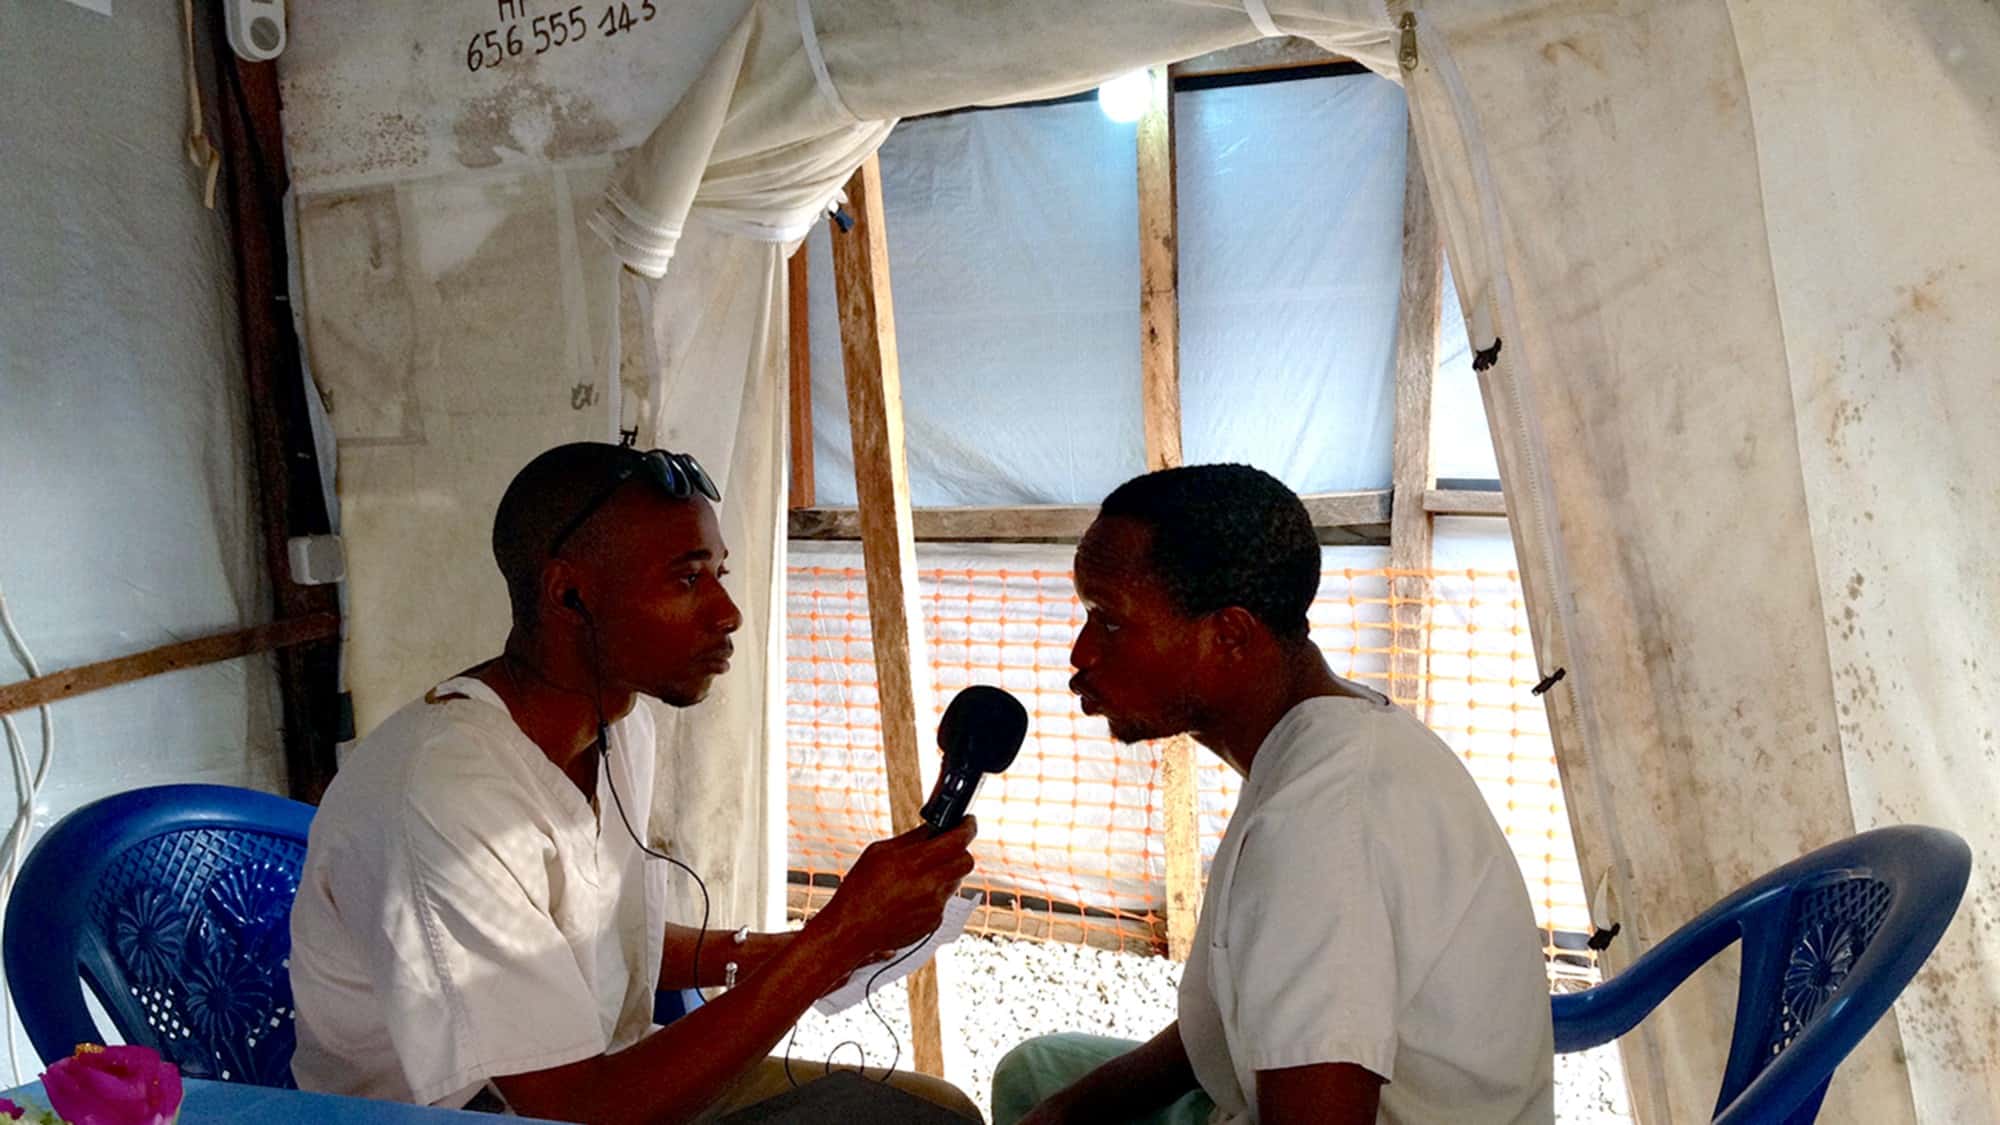 A man interviews another man in a tent.